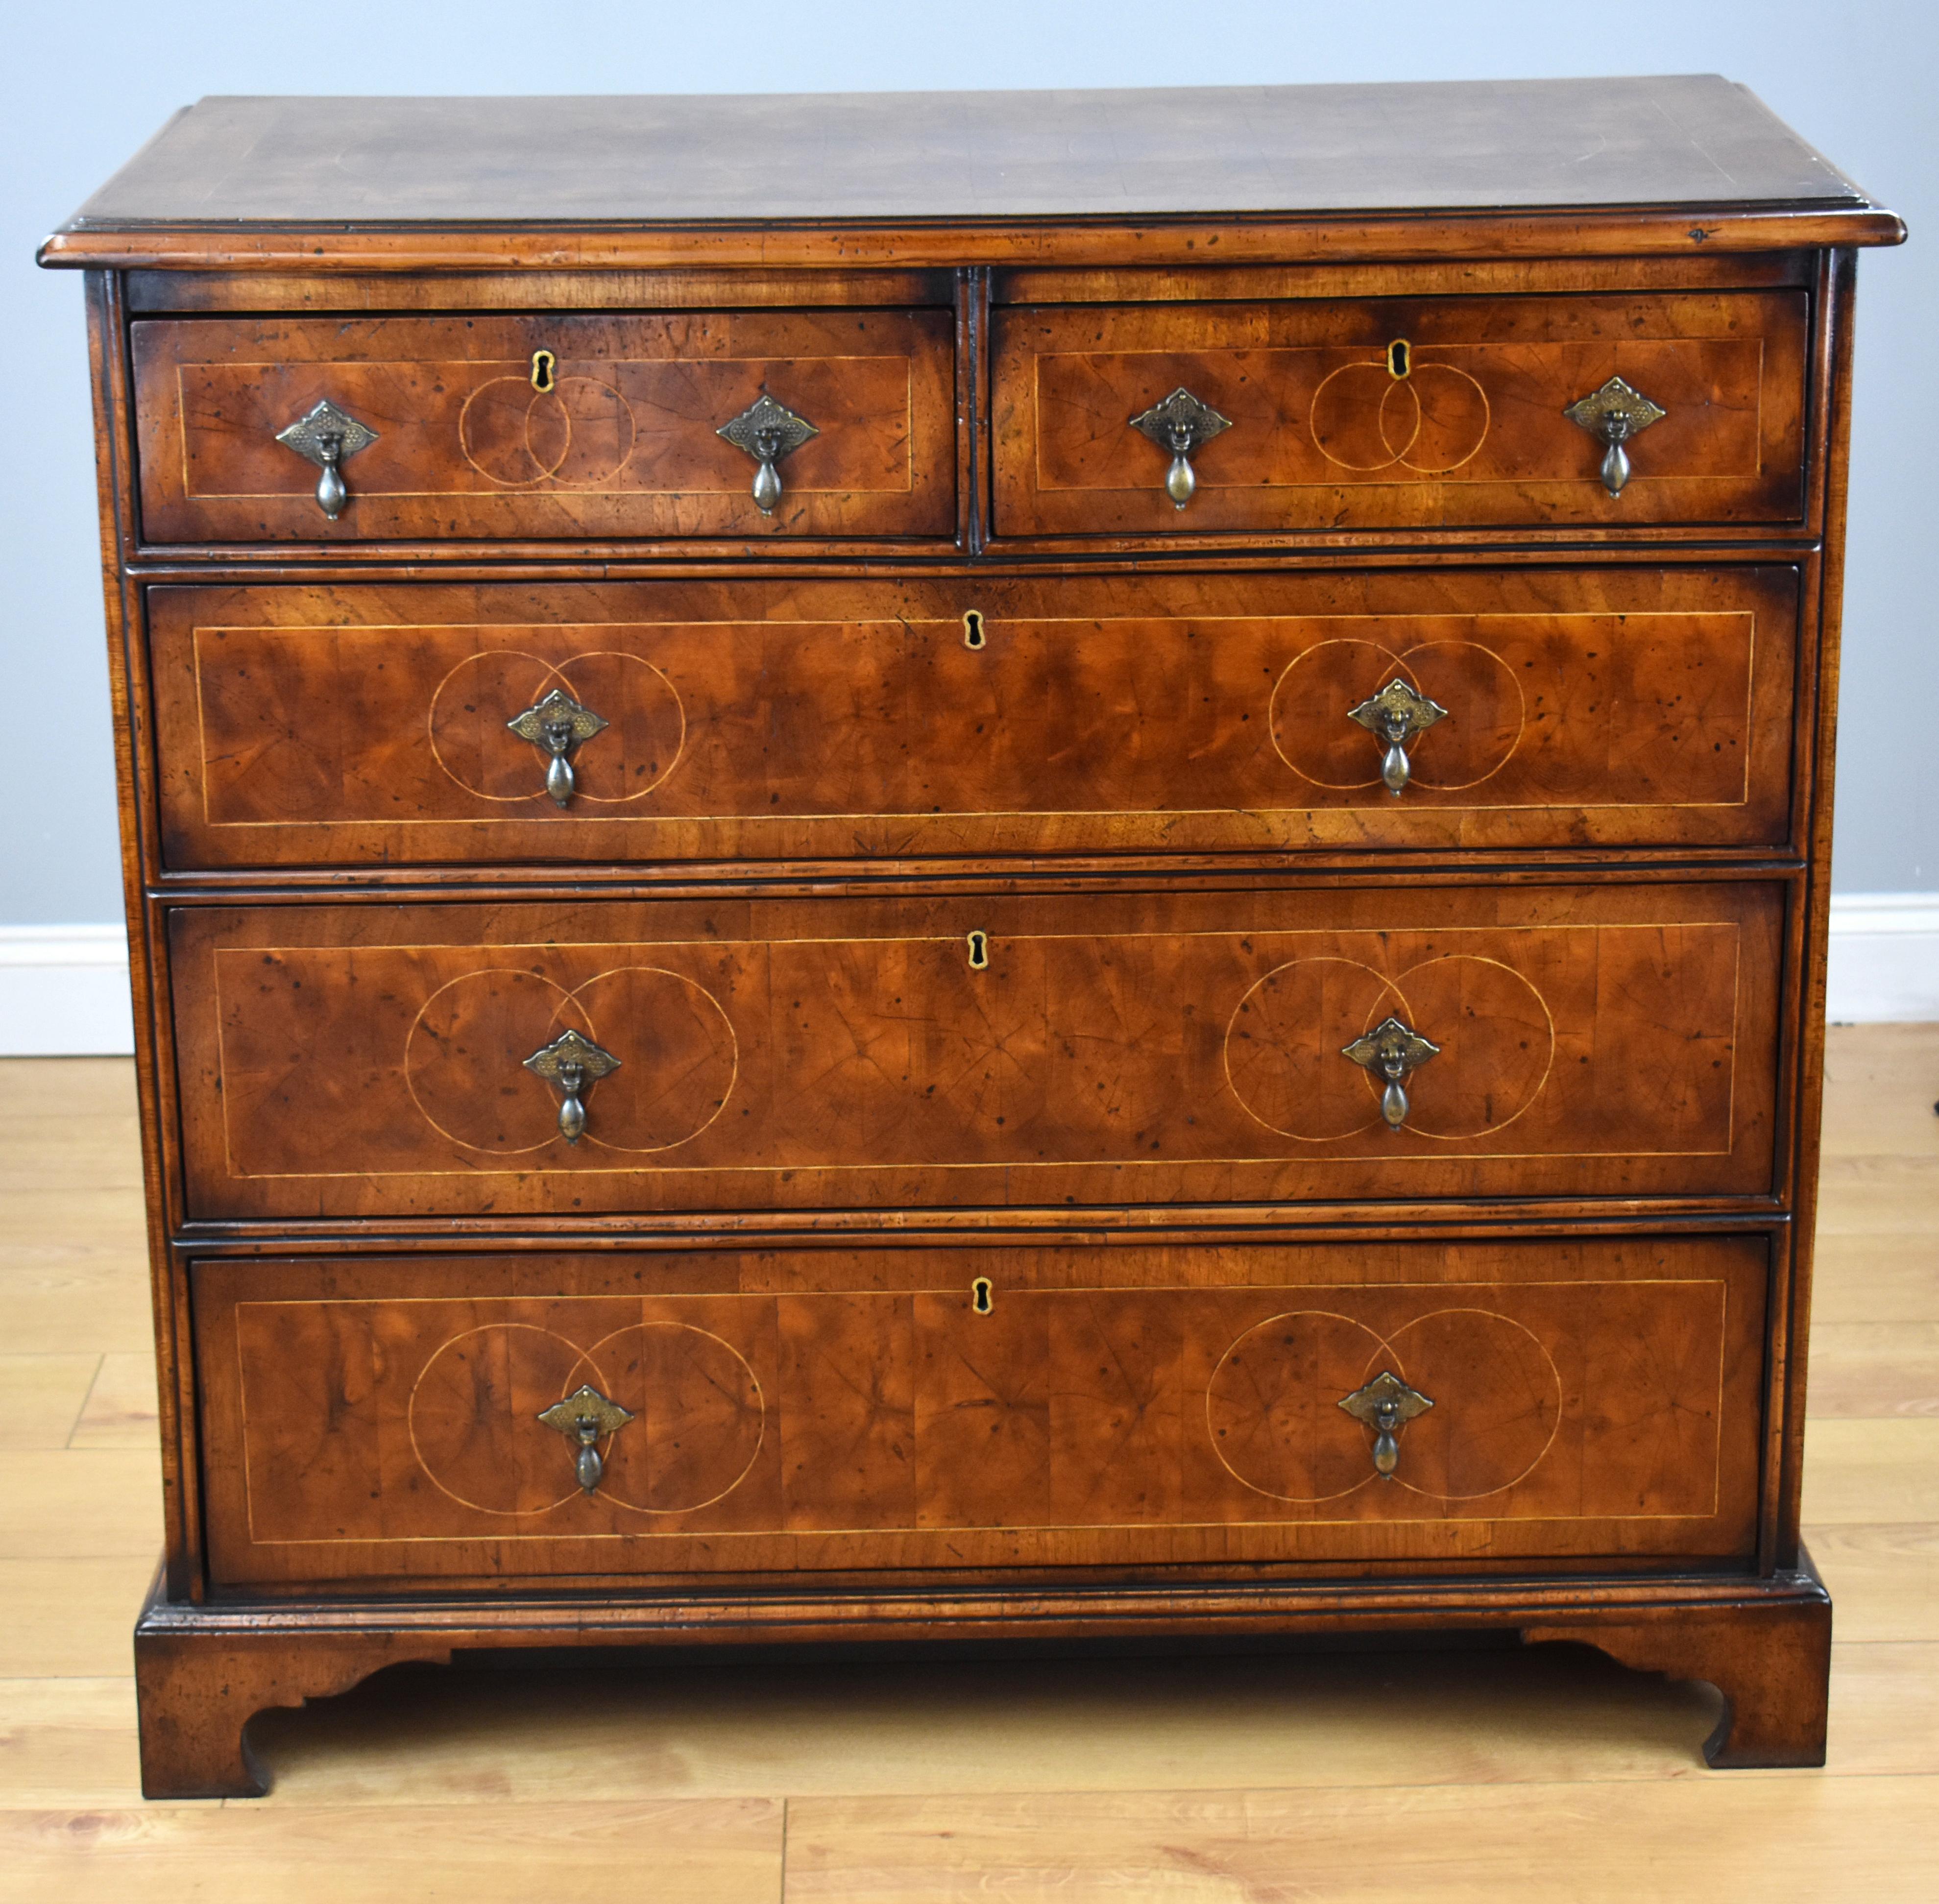 For sale is a good quality 18th century walnut and oyster veneer chest of drawers, the top inlaid with white line circles above an arrangement of five drawers (two short over three long) each oyster veneered and inlaid. The chest stands on bracket